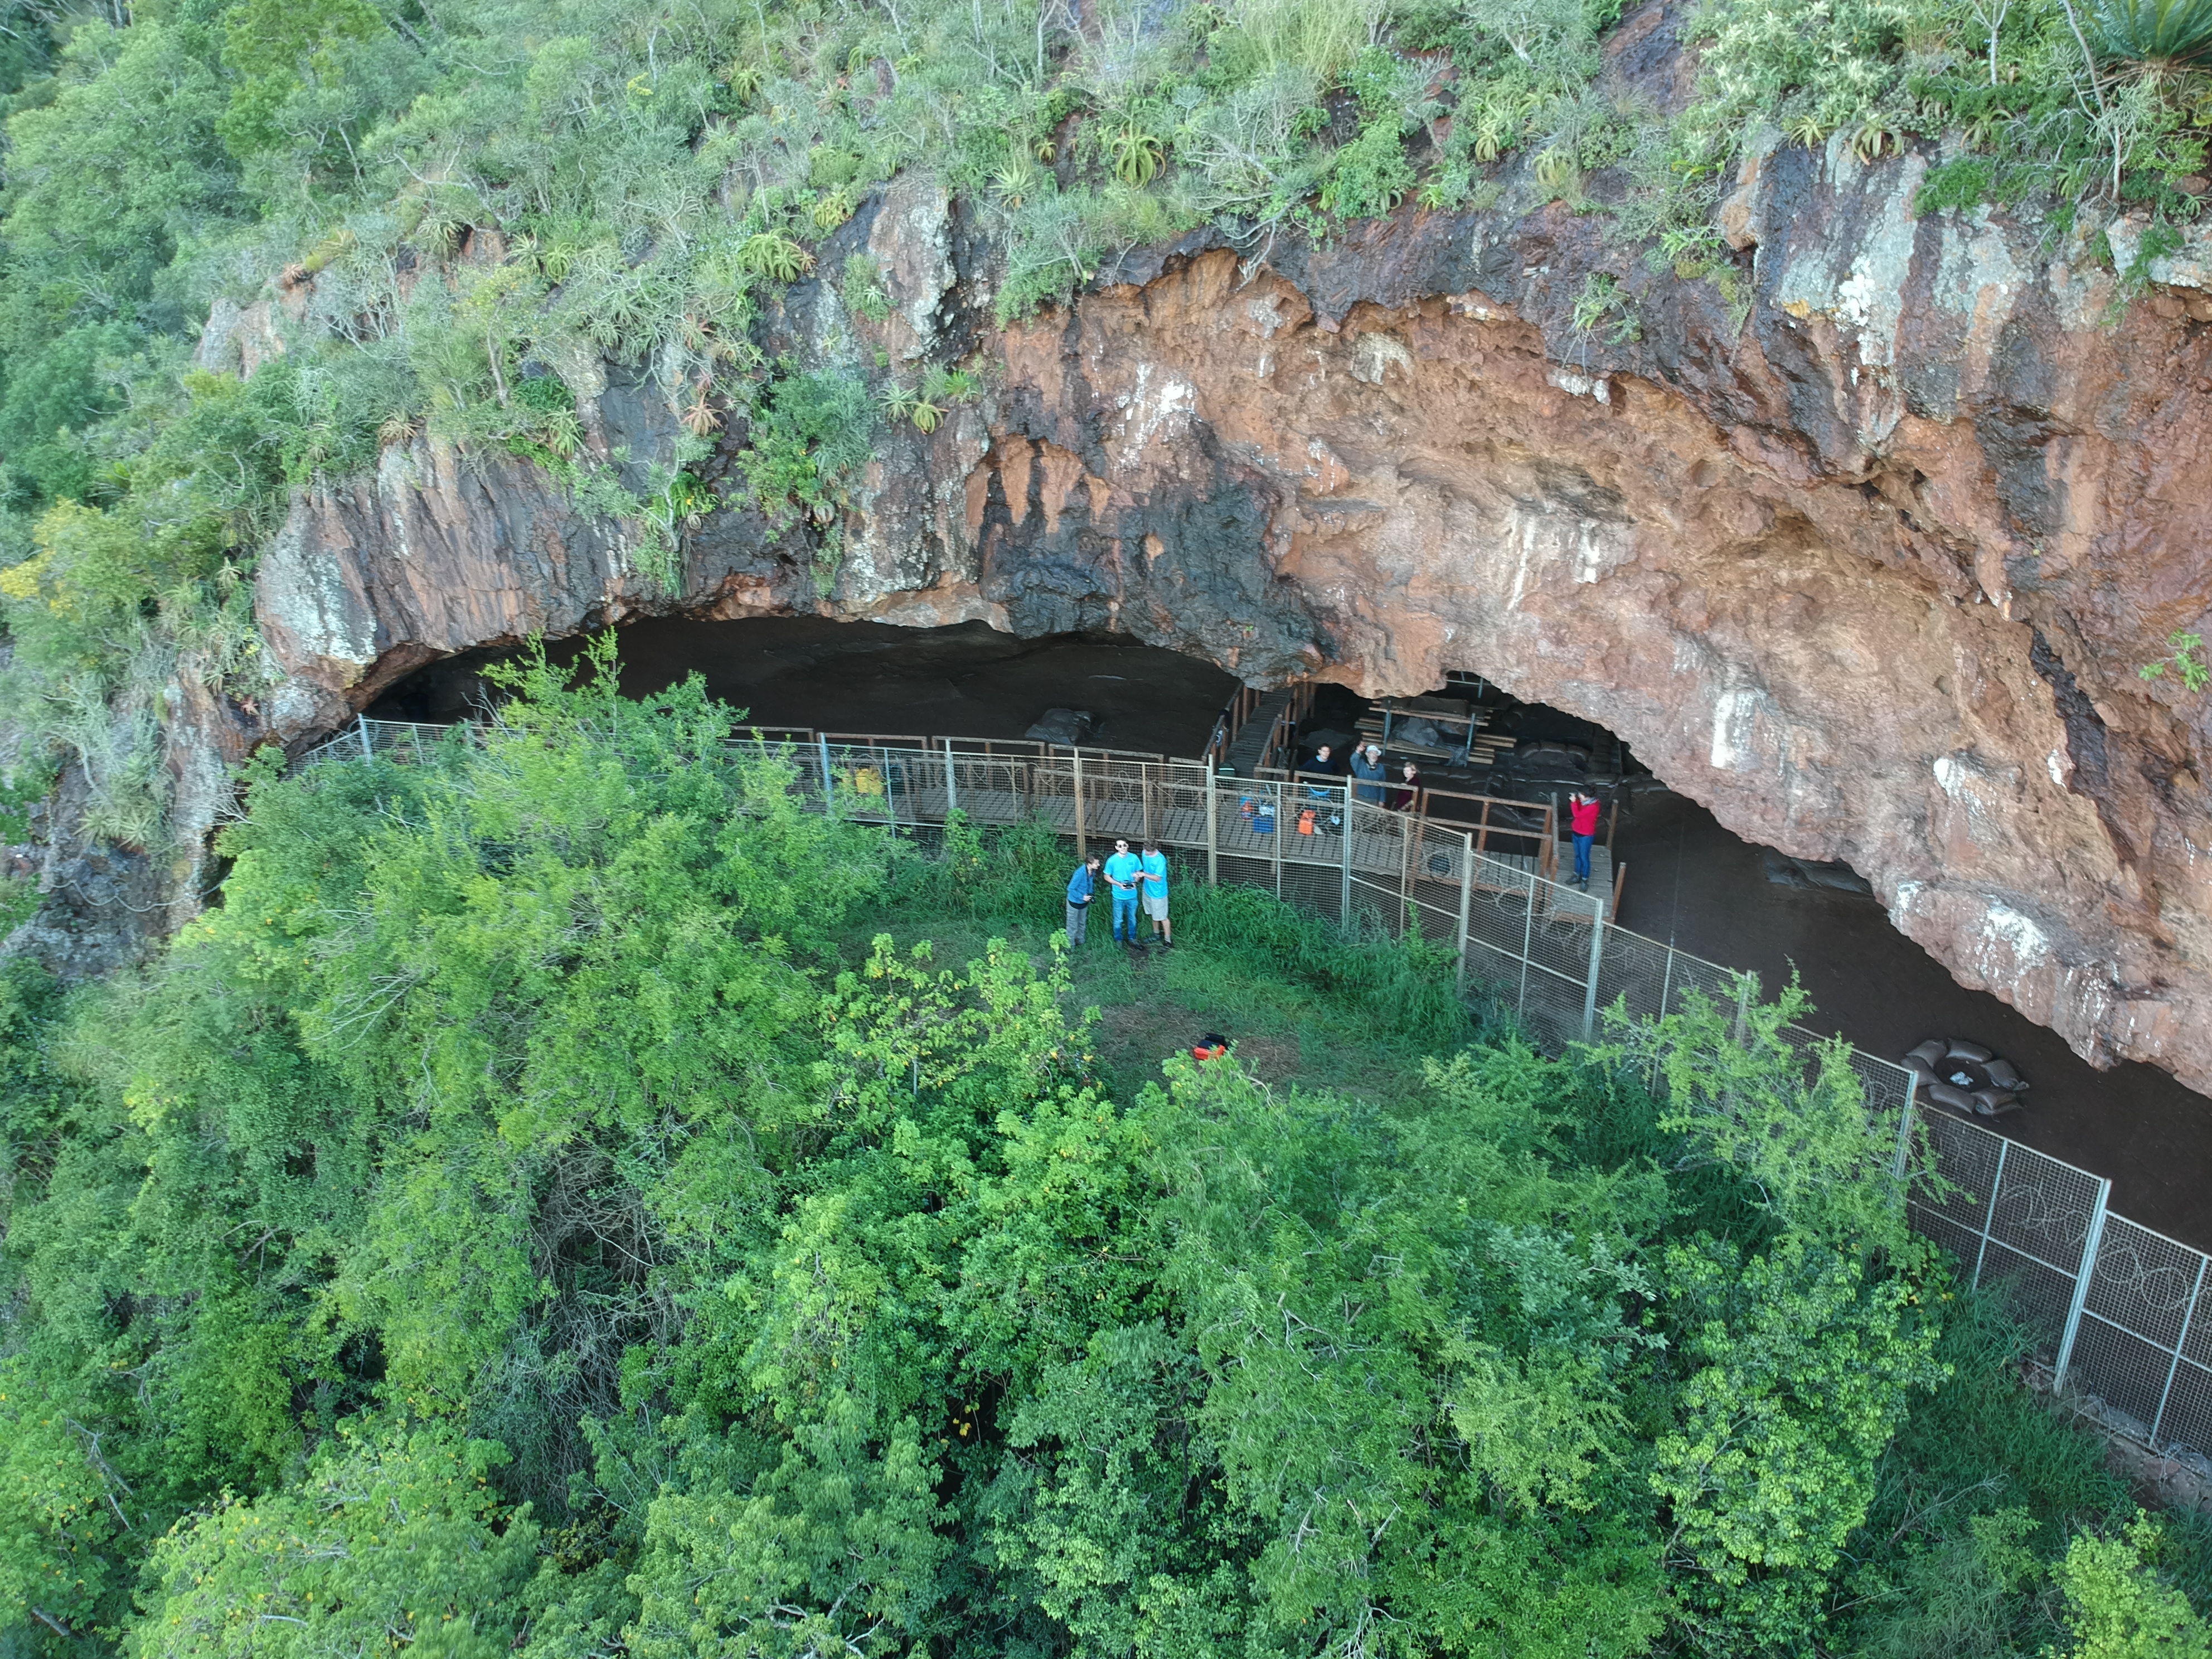 Entrance to the Border Cave in South Africa